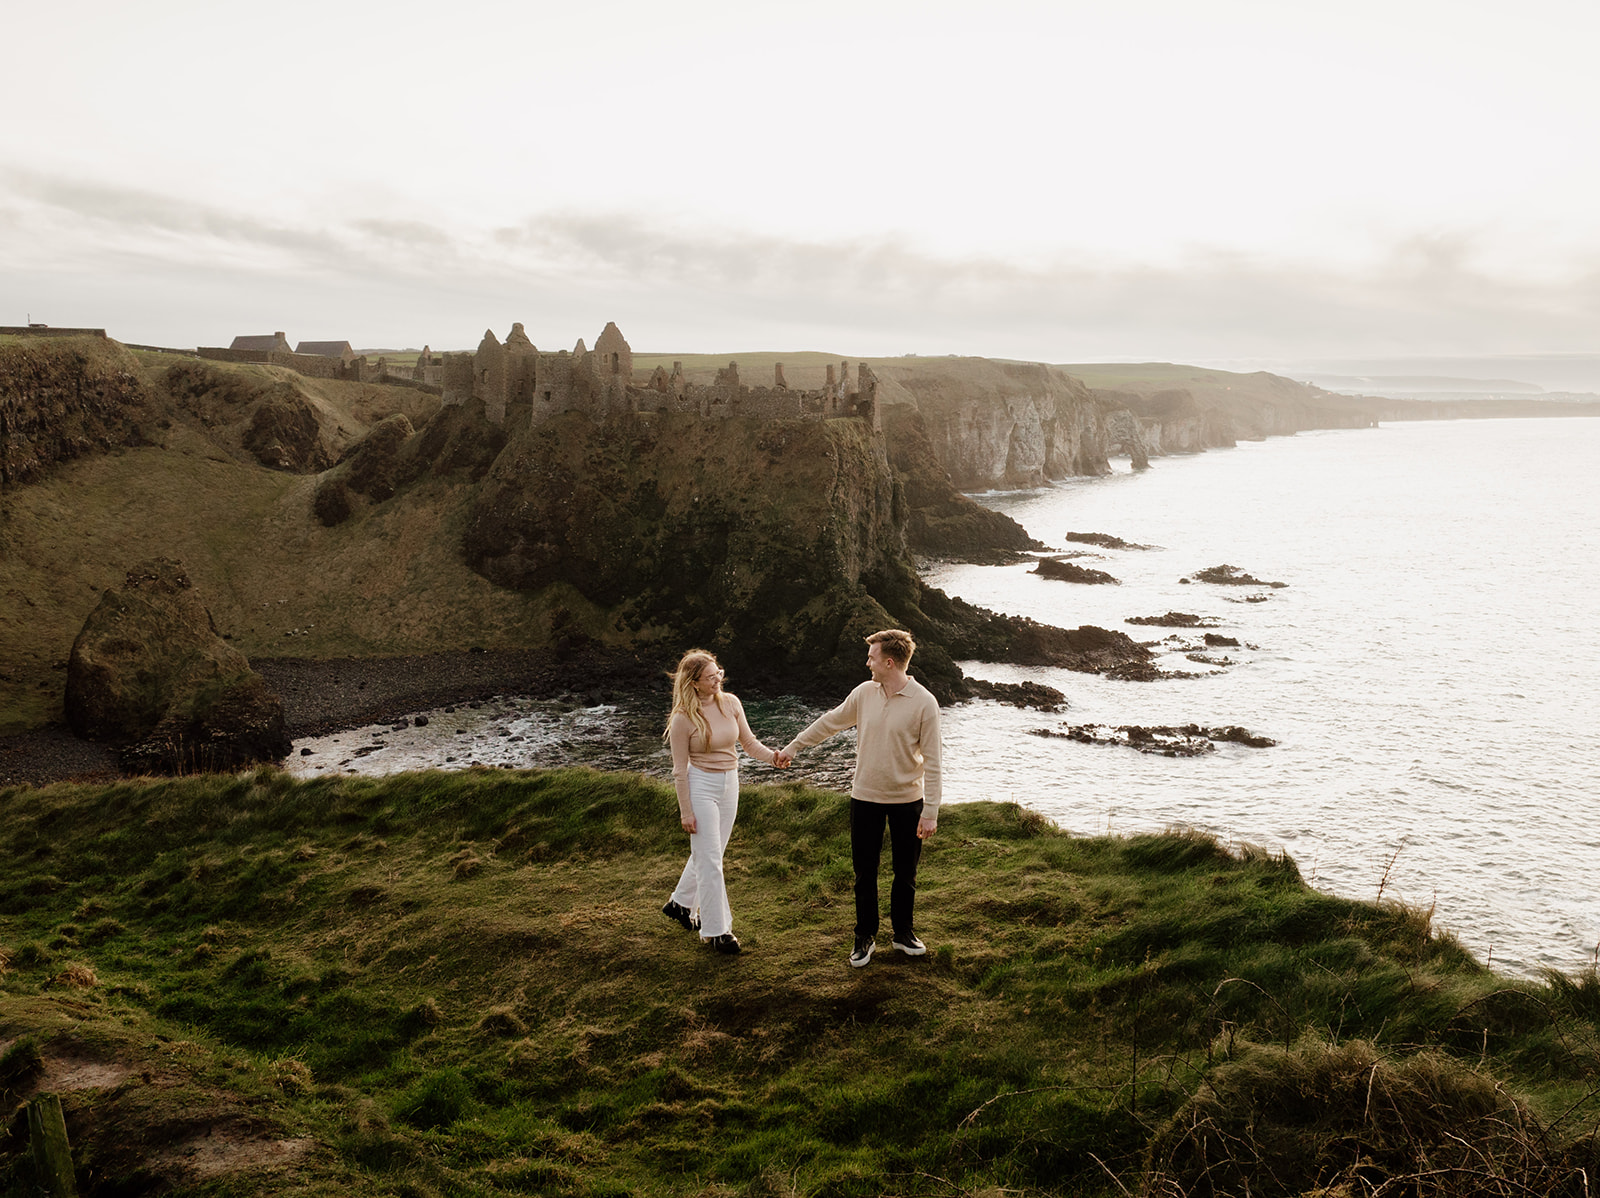 couple walking at the edge of the cliff with dunlice castle in the background for their pre engagement shoot